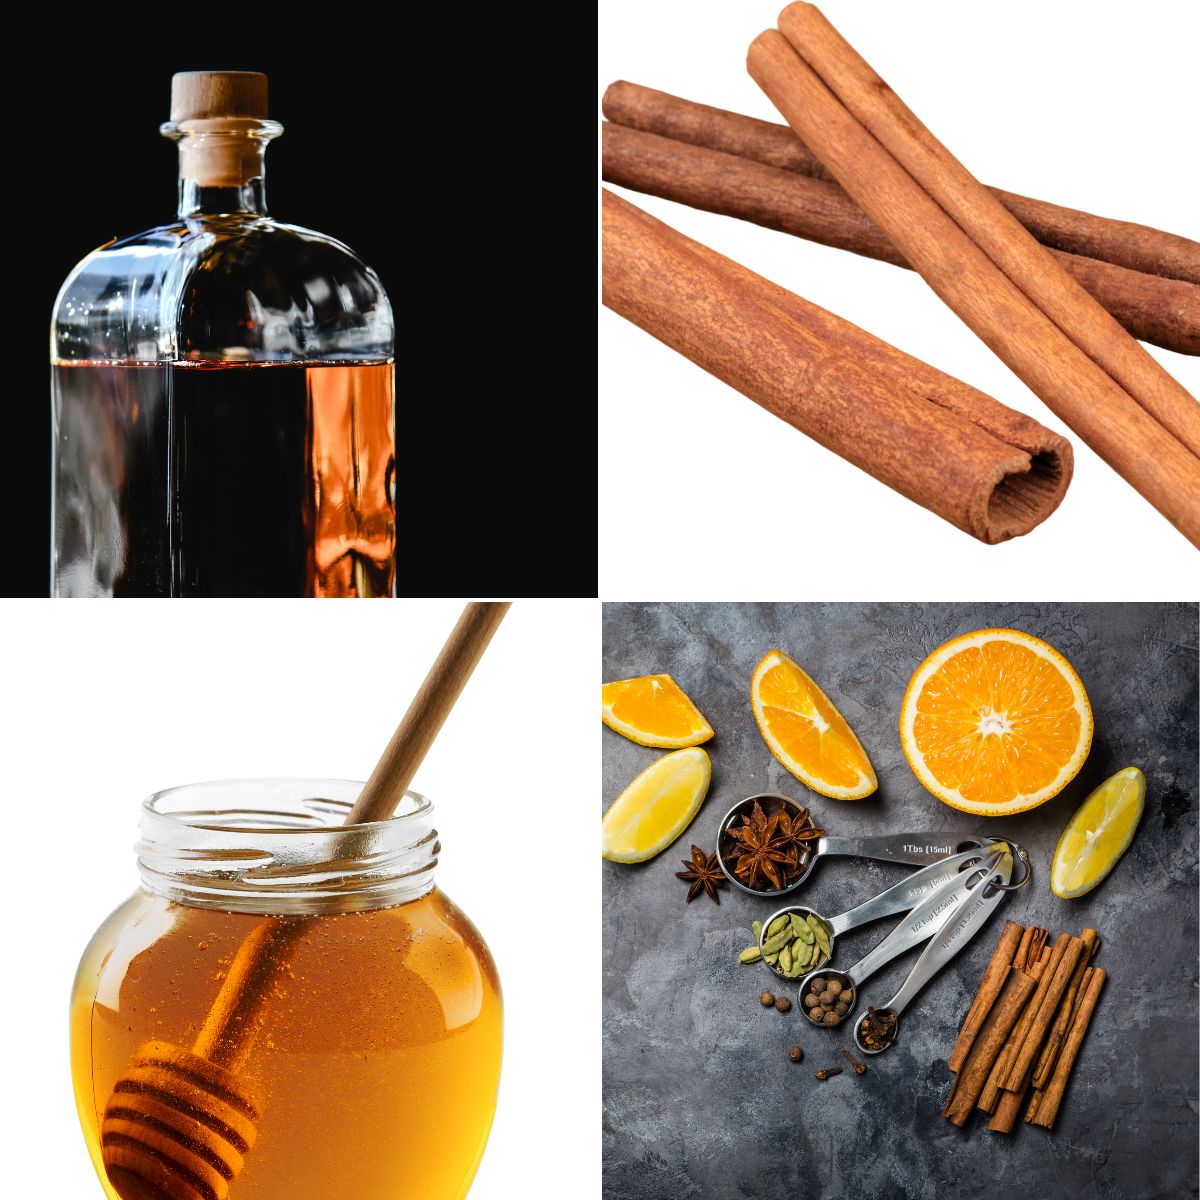 Whiskey, honey, cinnamon and spices.